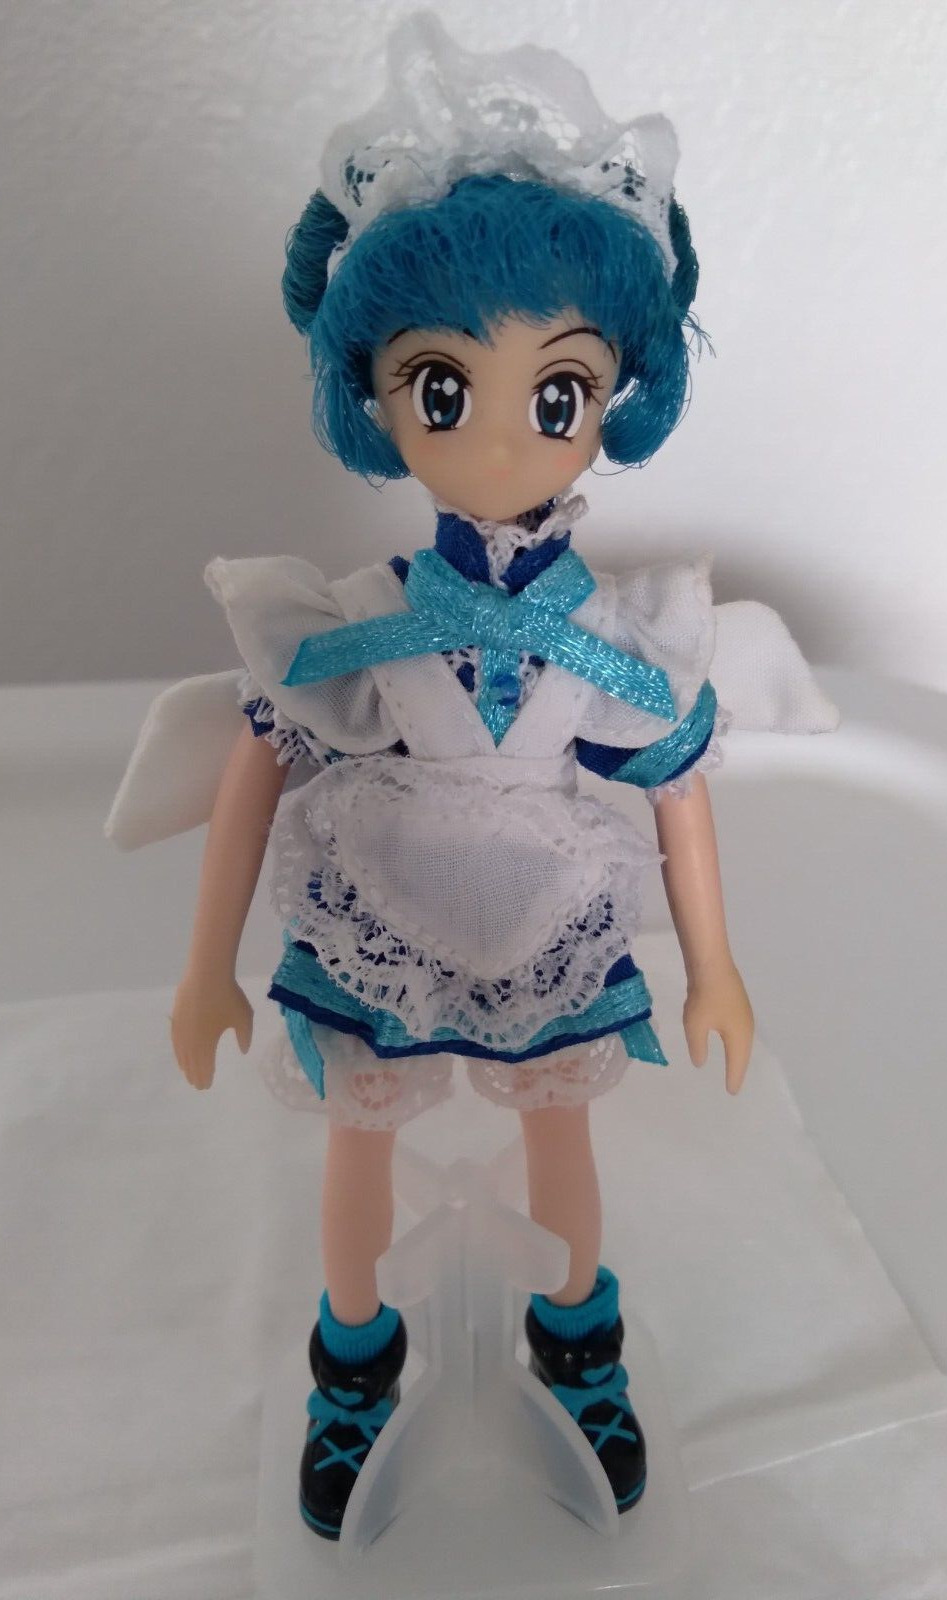 Anime Tokyo Mew Mew Elegant Collection Mint Doll In Maid Café Outfit New Rare